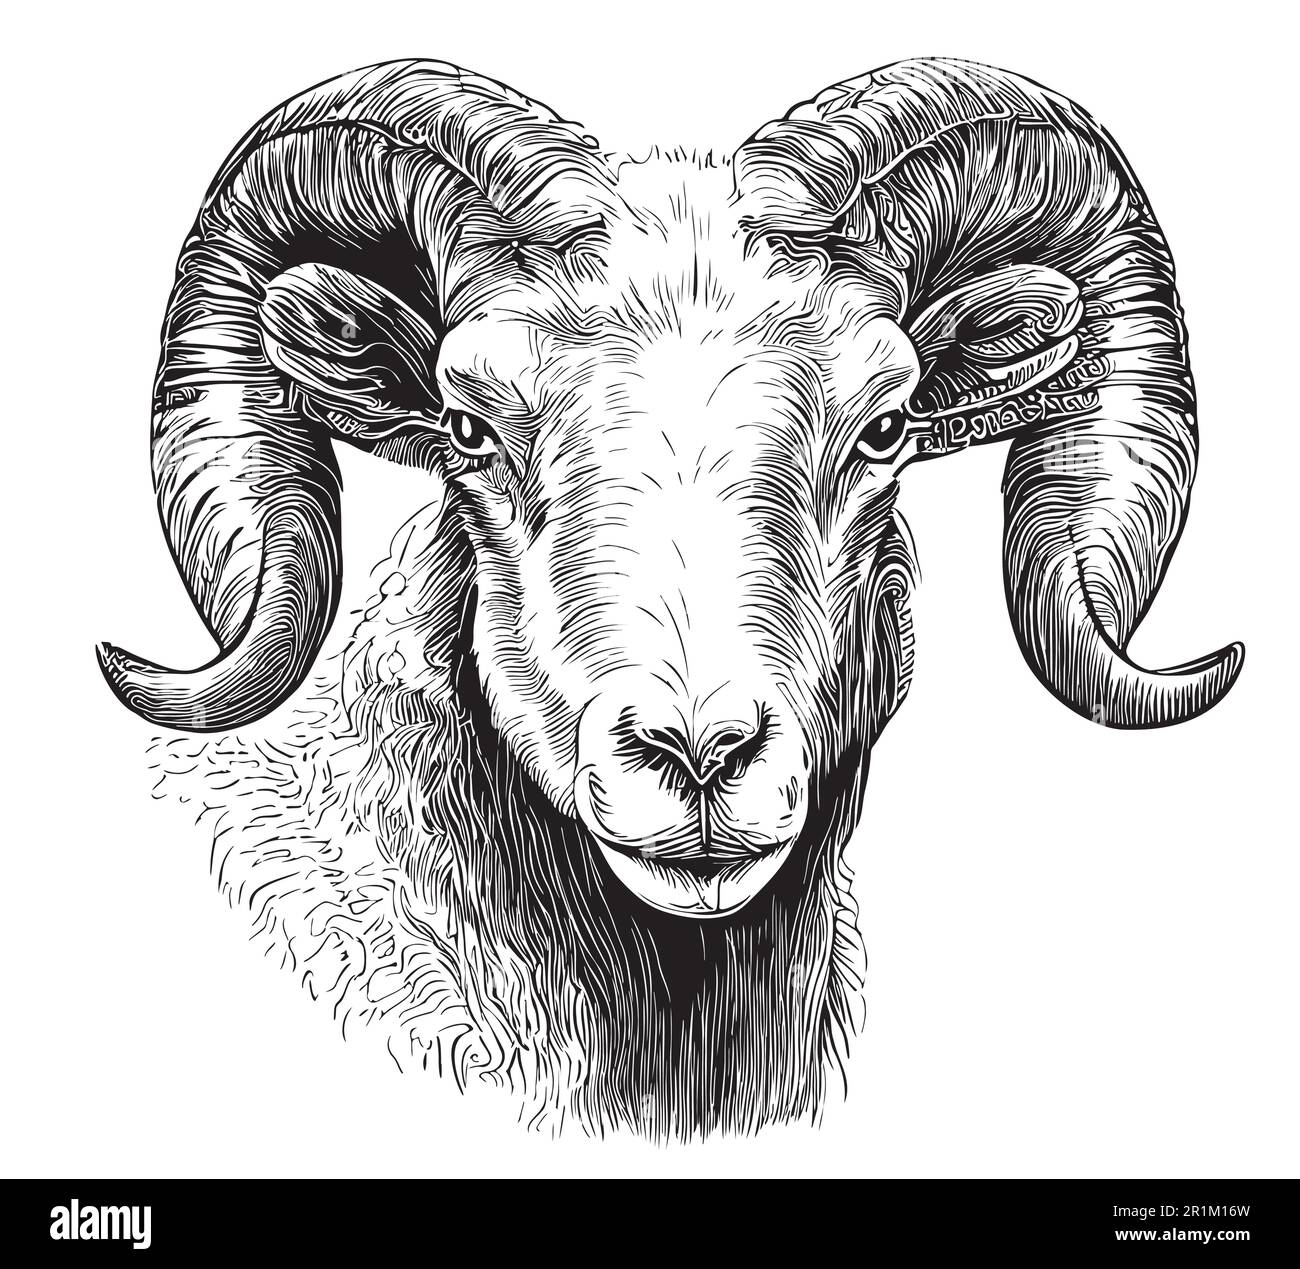 Ram face sketch hand drawn in doodle style illustration Stock Vector Image  & Art - Alamy